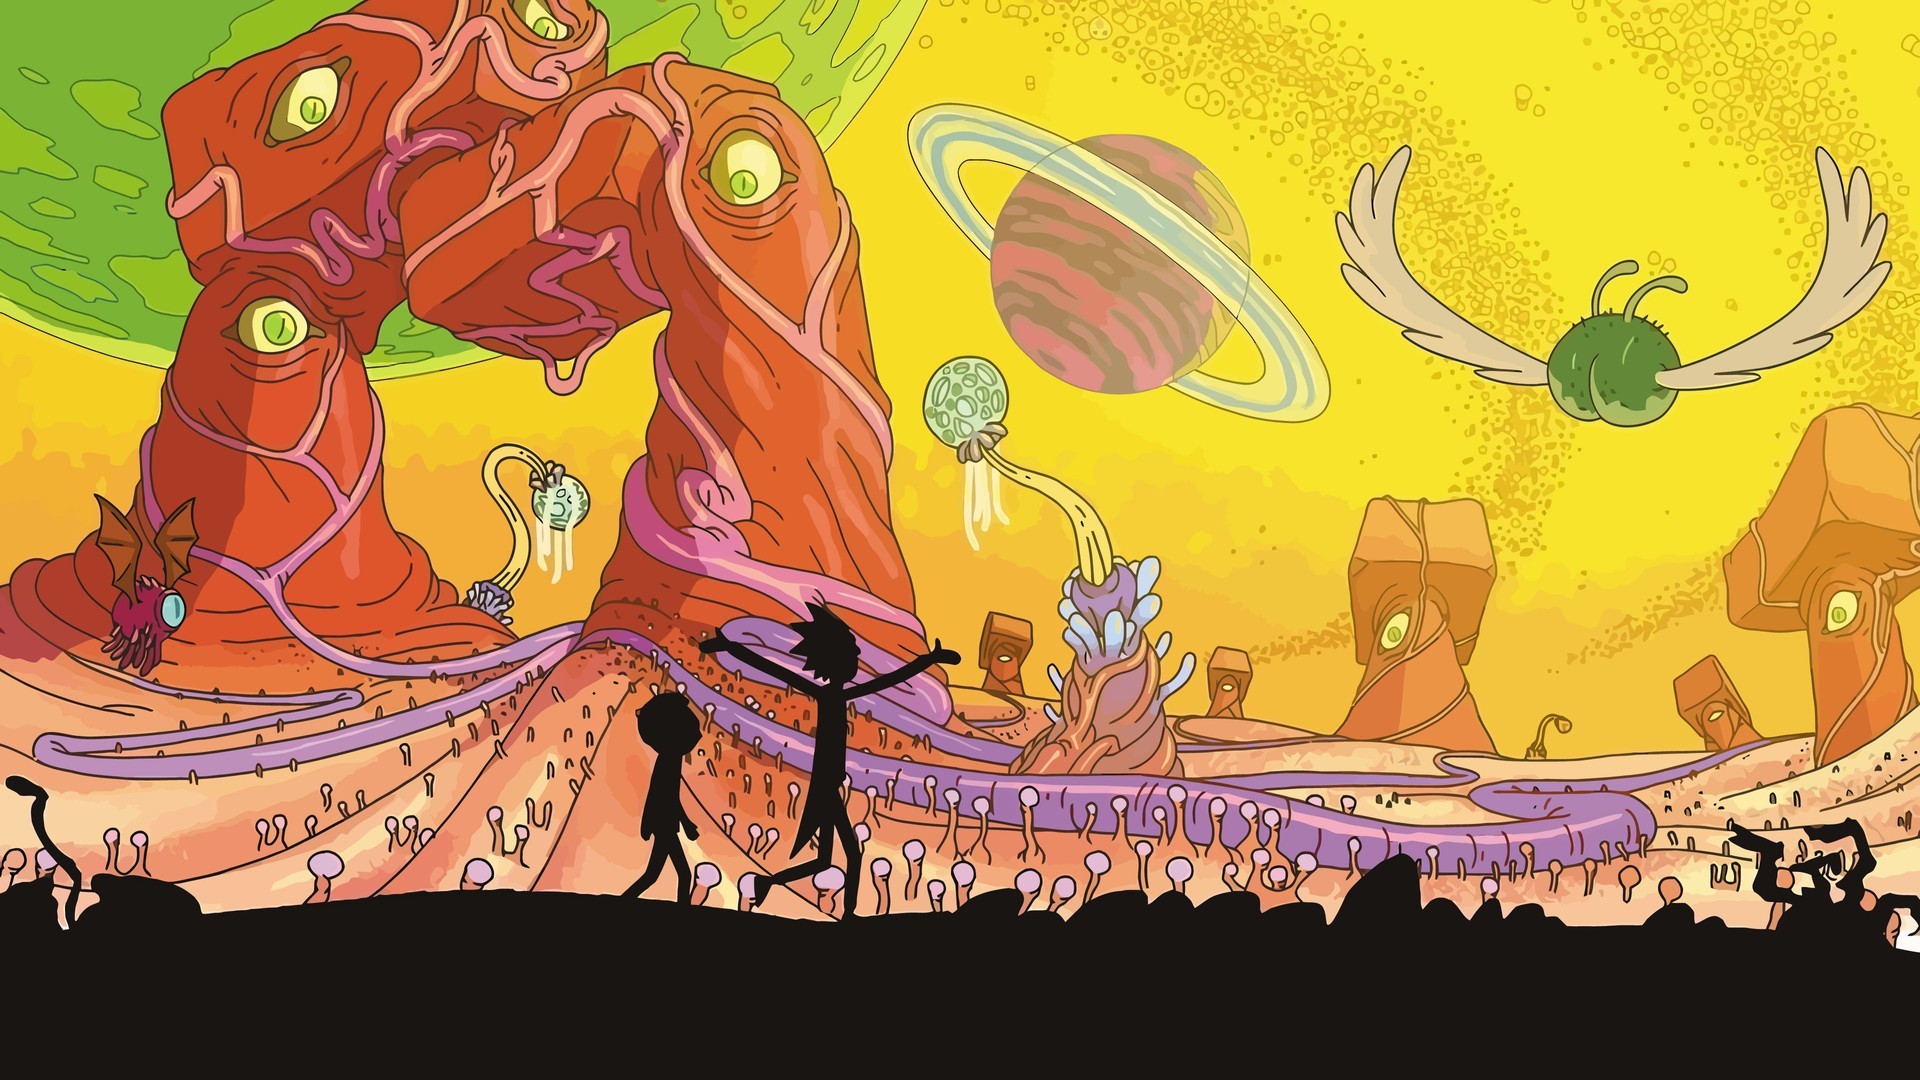 New Rick and Morty Movie Wallpaper with high-resolution 1920x1080 pixel. You can use this poster wallpaper for your Desktop Computers, Mac Screensavers, Windows Backgrounds, iPhone Wallpapers, Tablet or Android Lock screen and another Mobile device